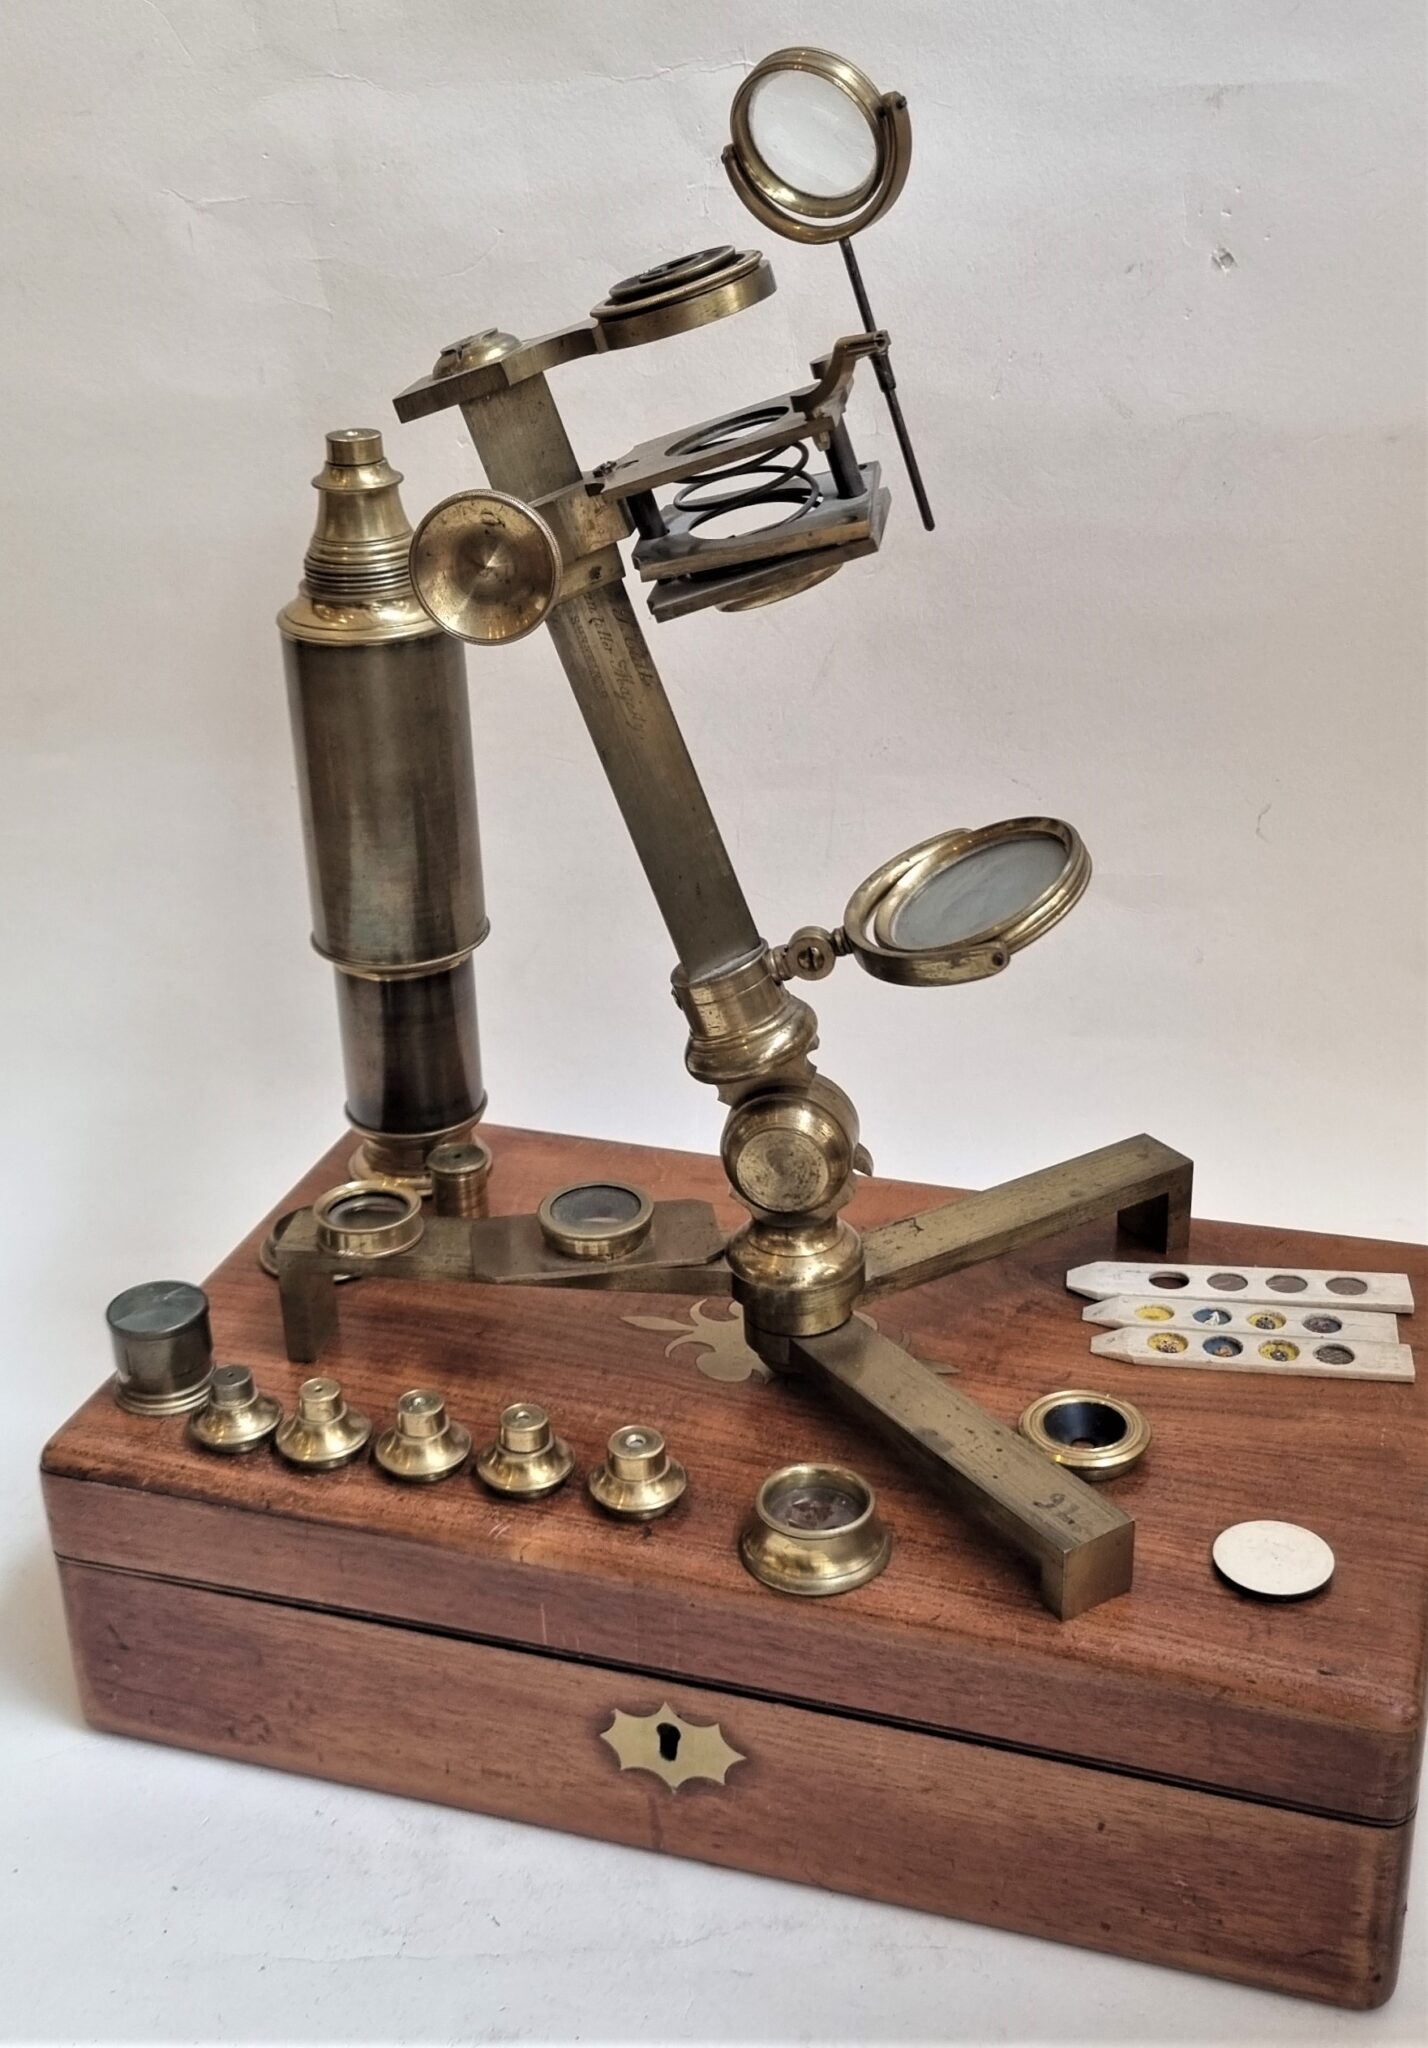 Cutts, Universal microscope, simple and compound, inspired by Carpenter’s microscope, England, circa 1830